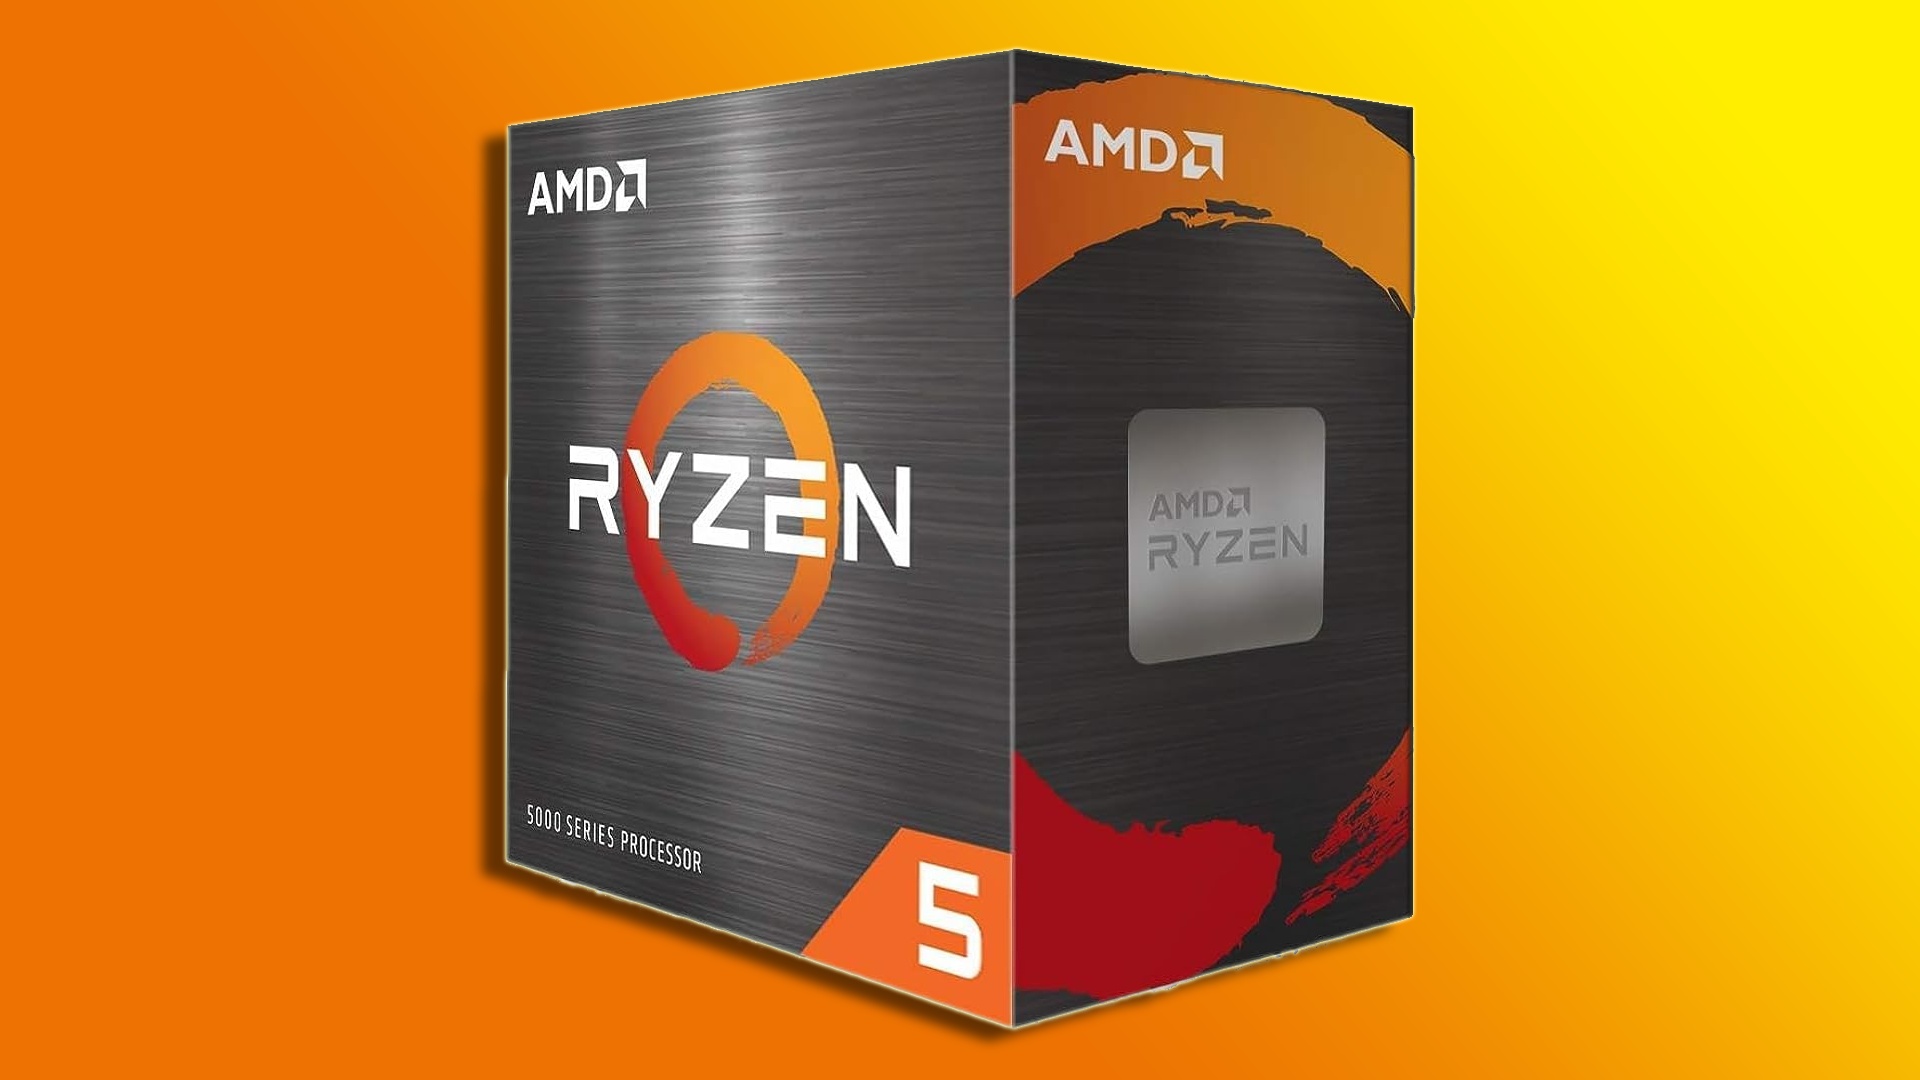 Get this great AMD Ryzen processor super cheap for Cyber Monday